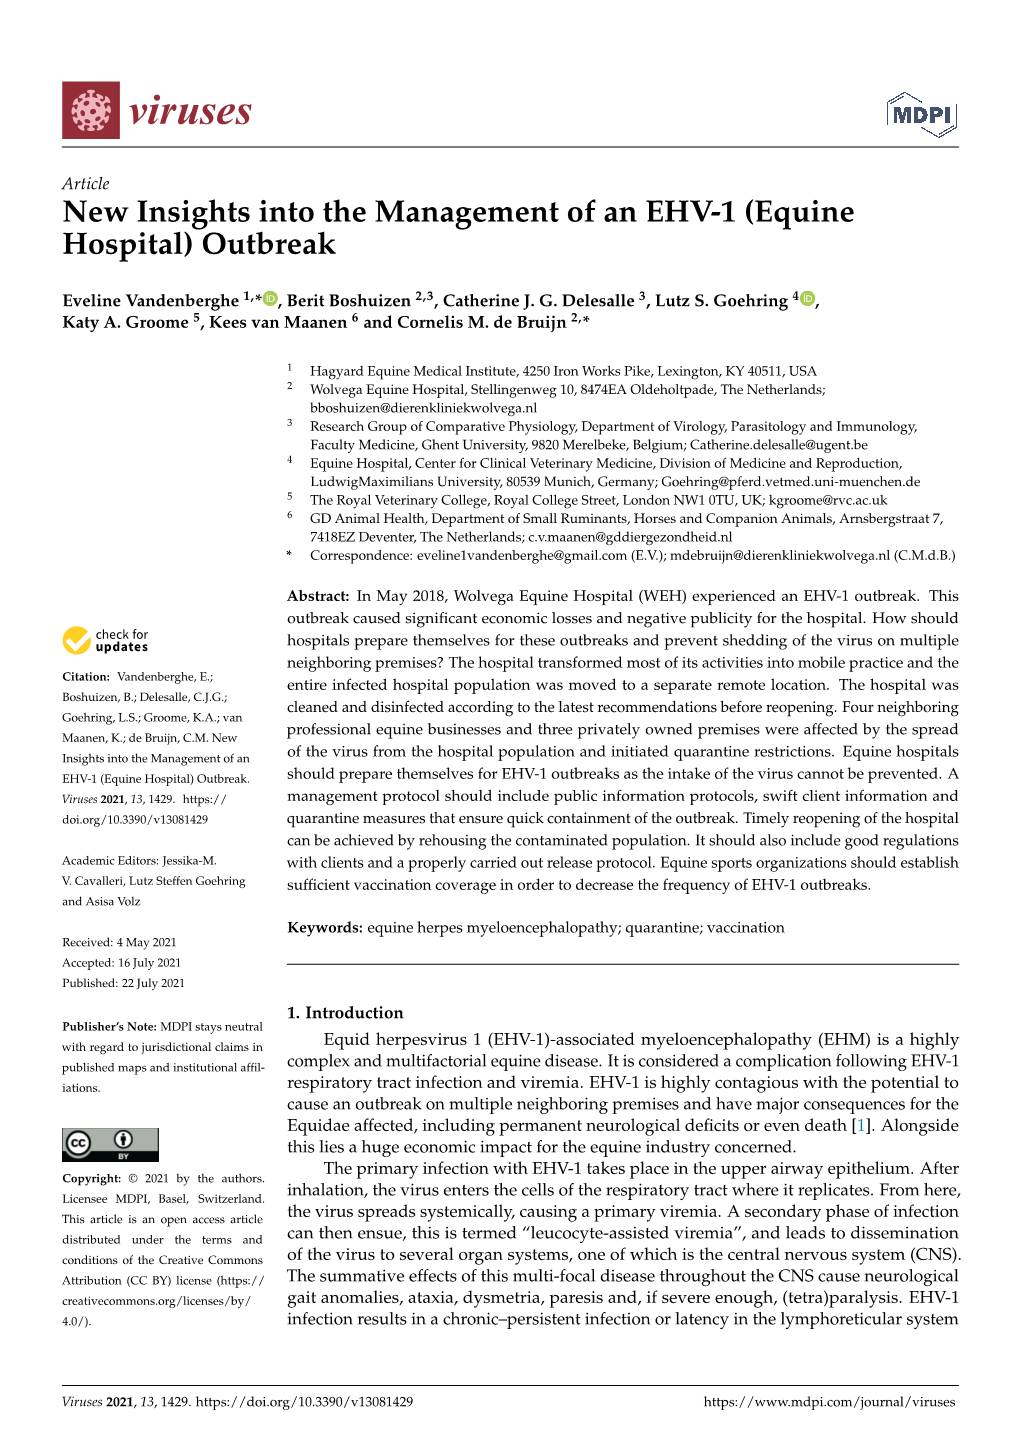 New Insights Into the Management of an EHV-1 (Equine Hospital) Outbreak